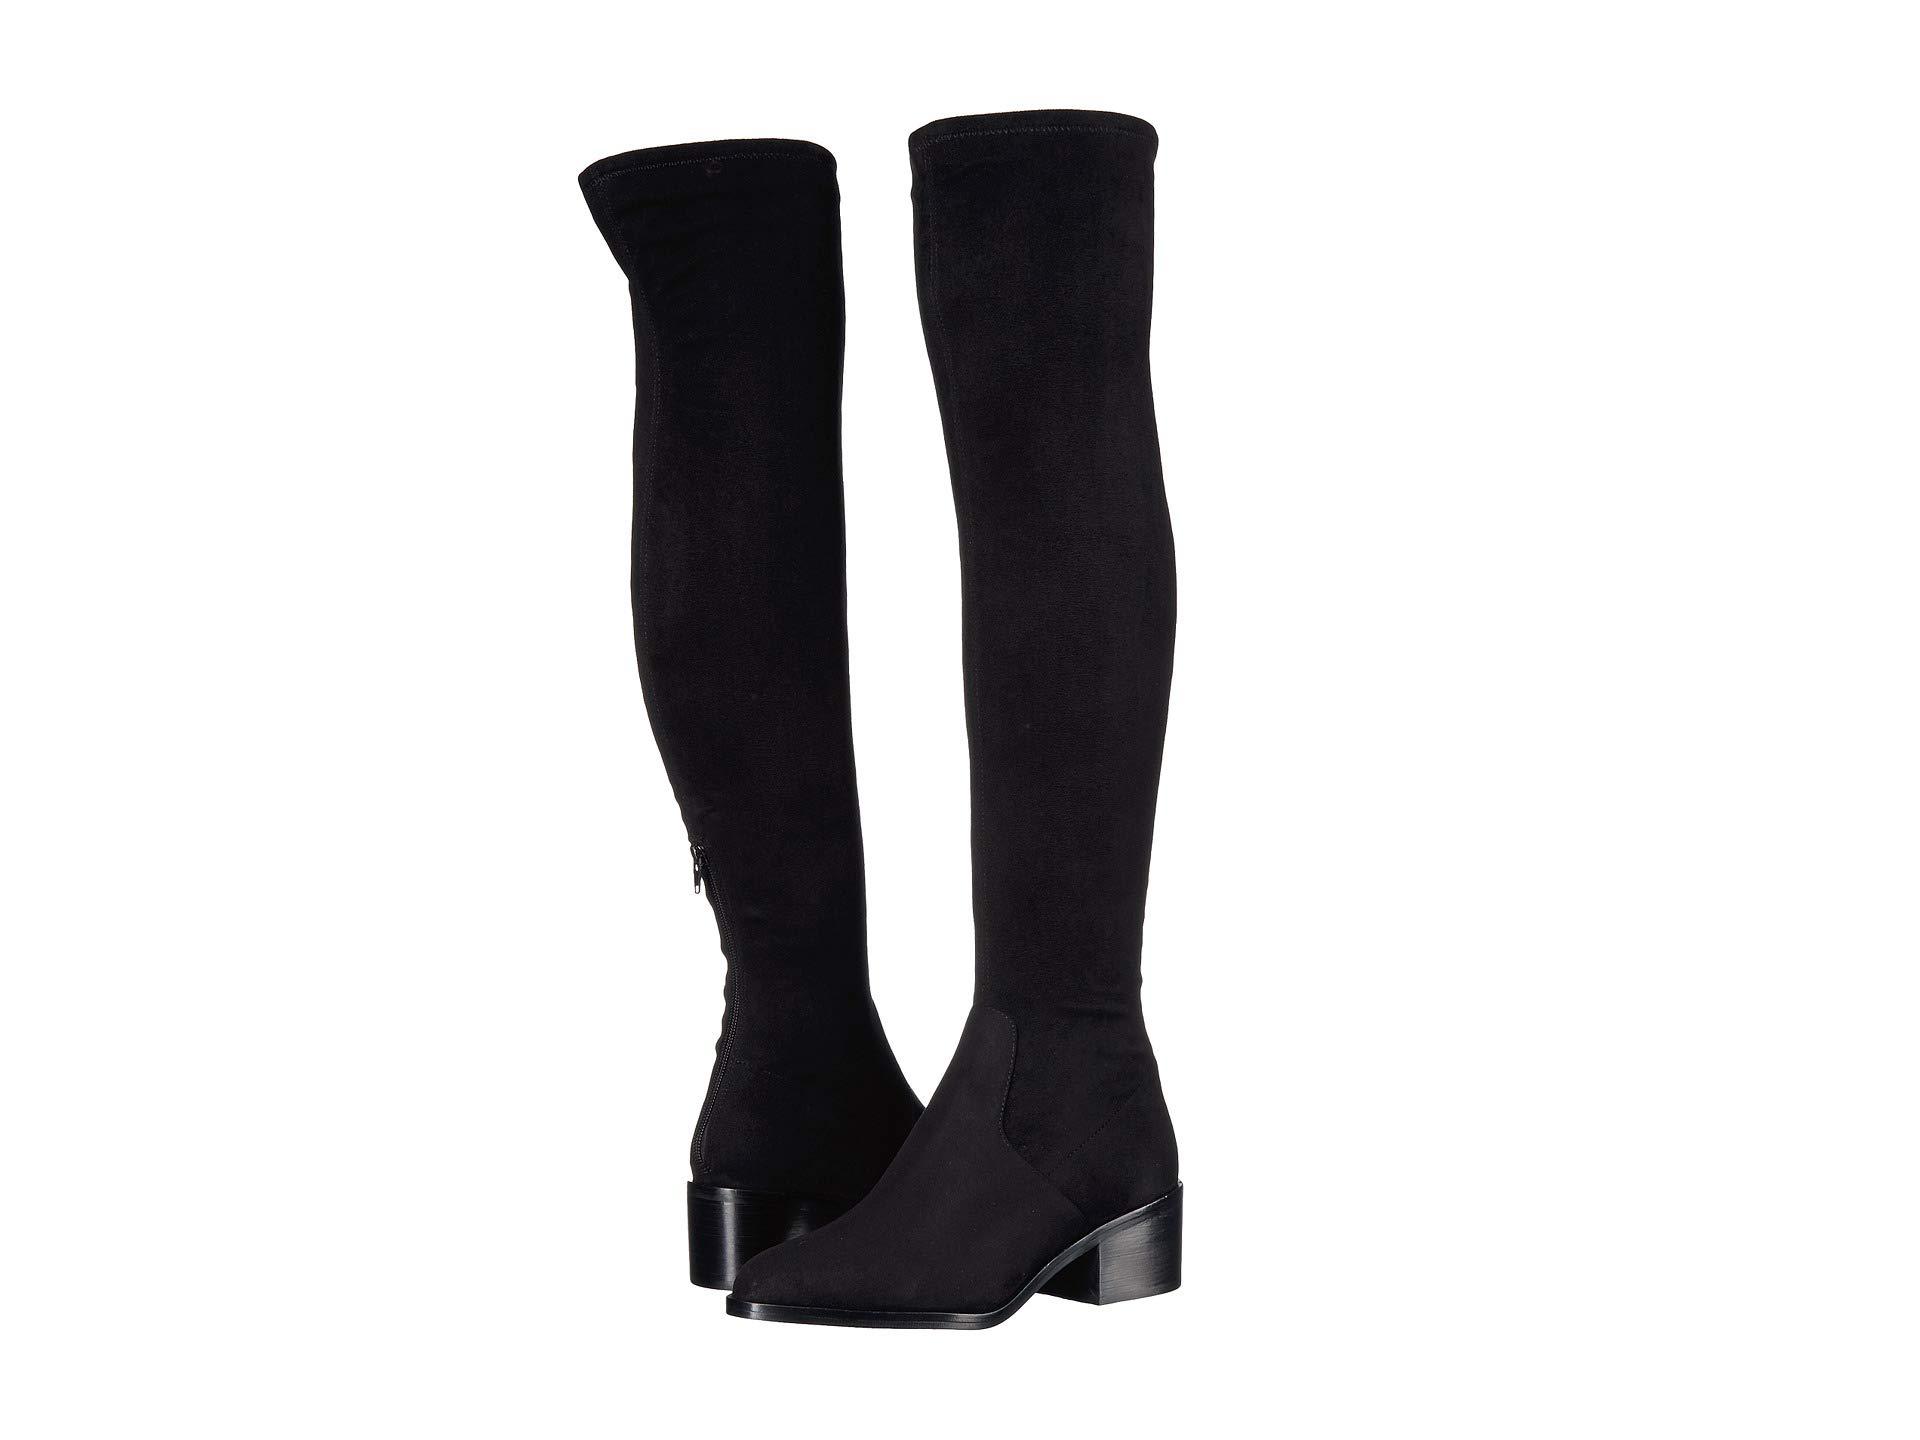 Steve Madden Leather Georgette Over The Knee Boot in Black - Lyst